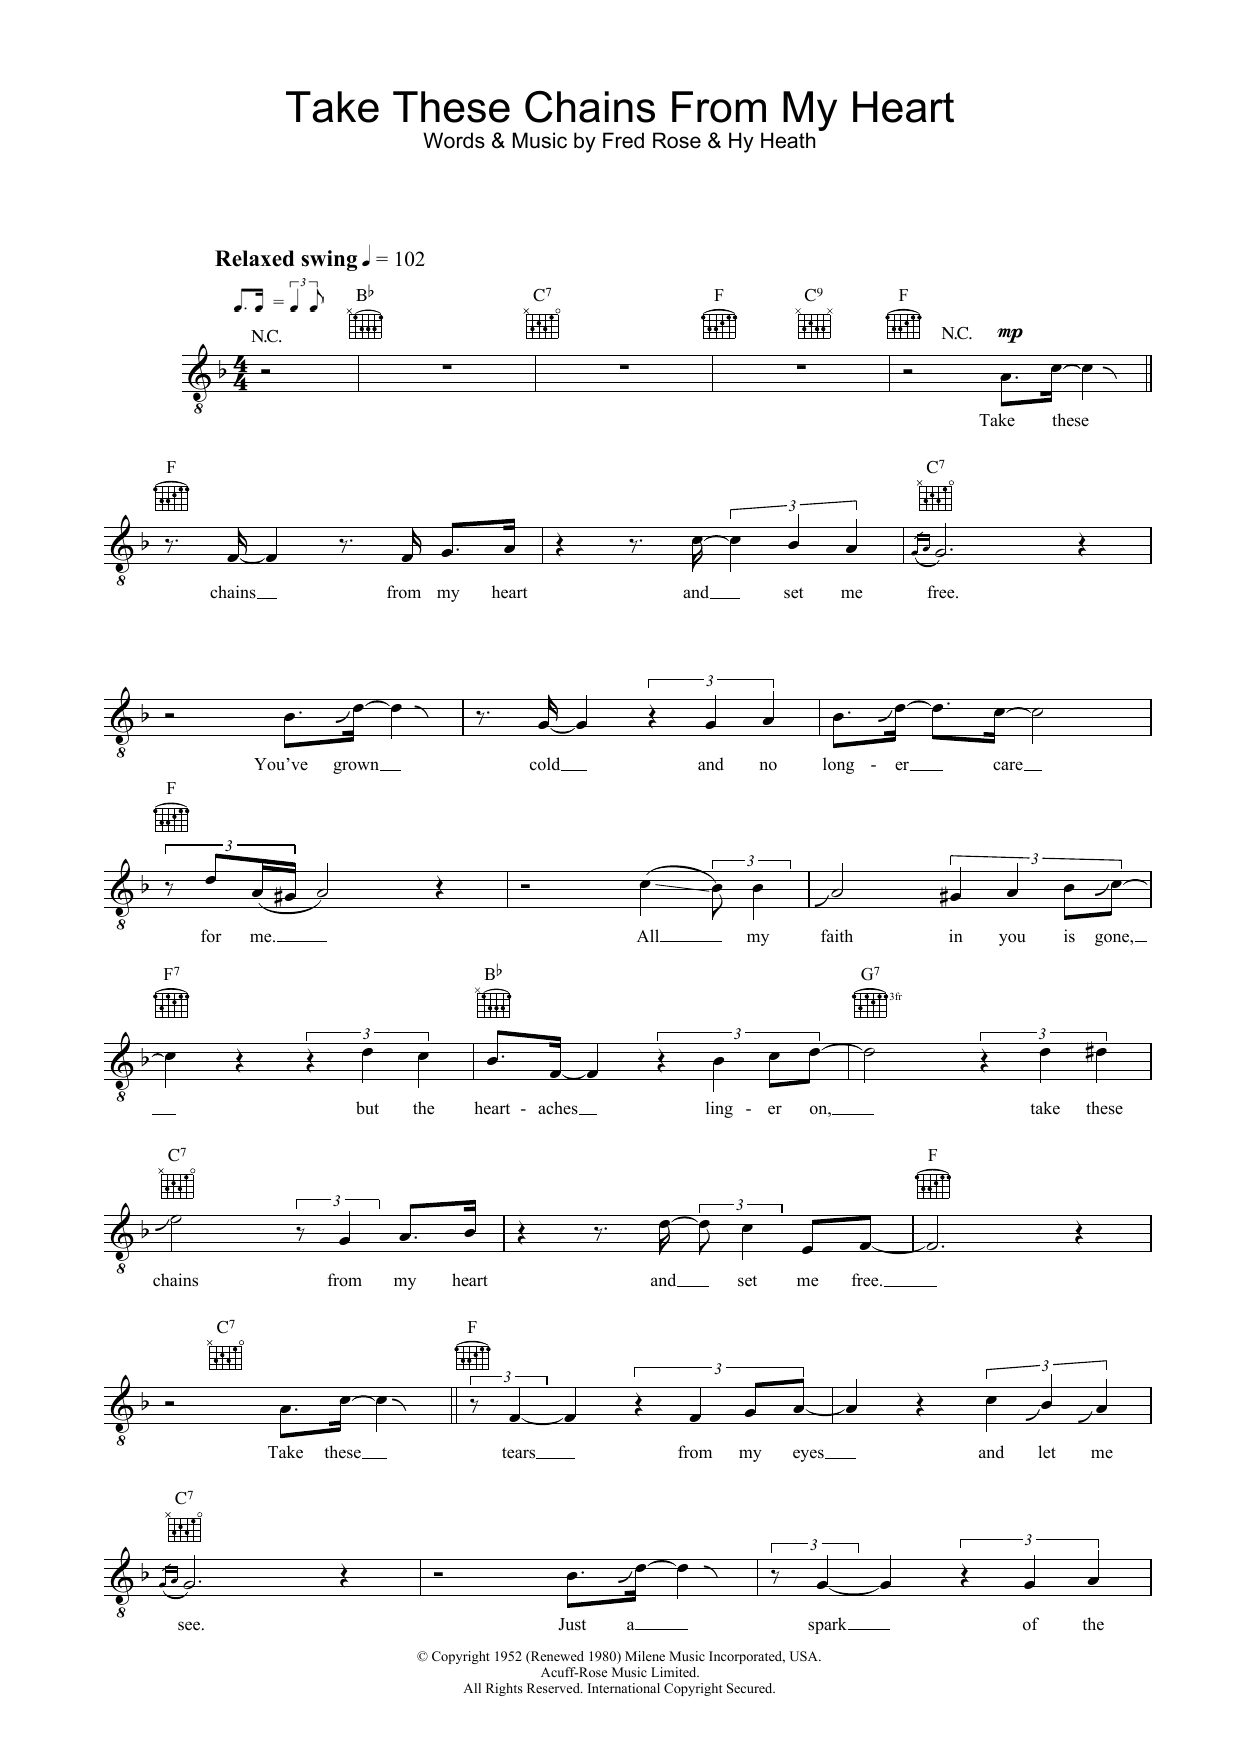 Download Ray Charles Take These Chains From My Heart Sheet Music